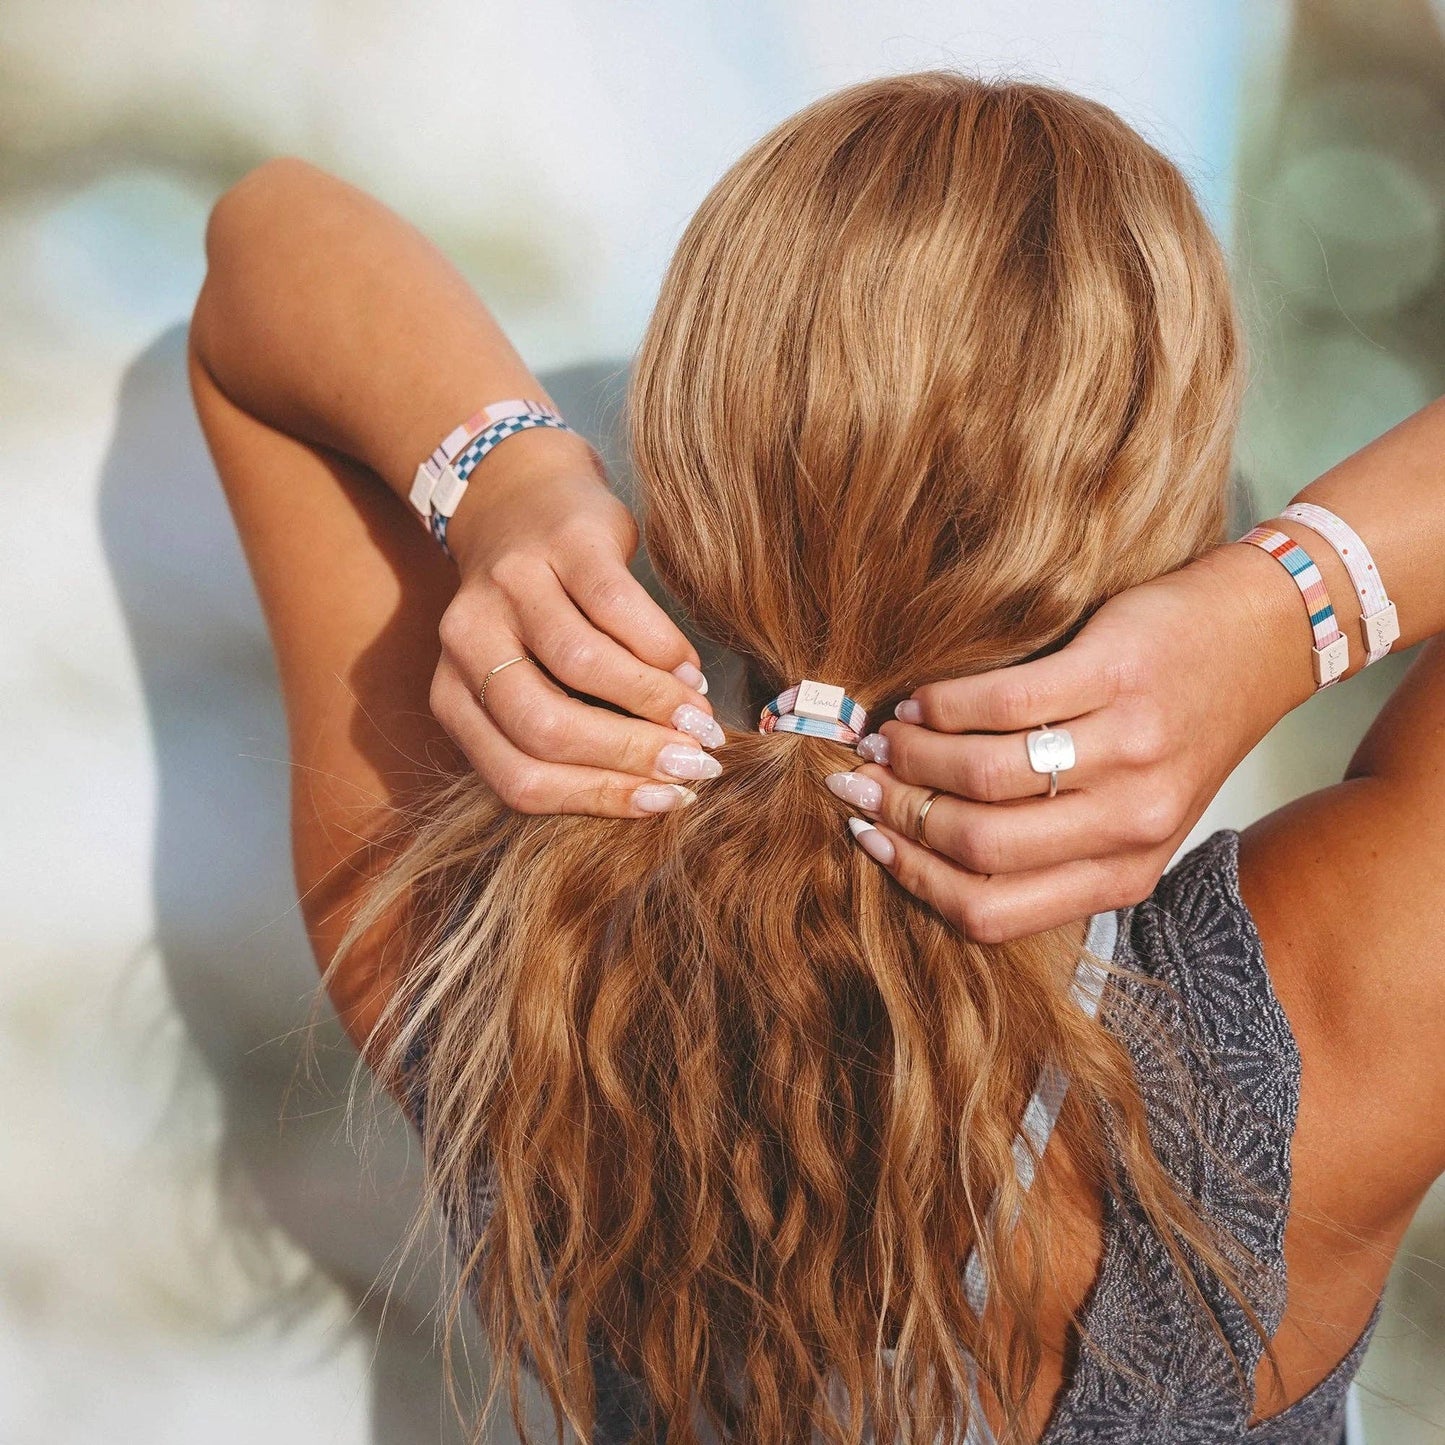 Passion - Hair + Wrist Band: Small